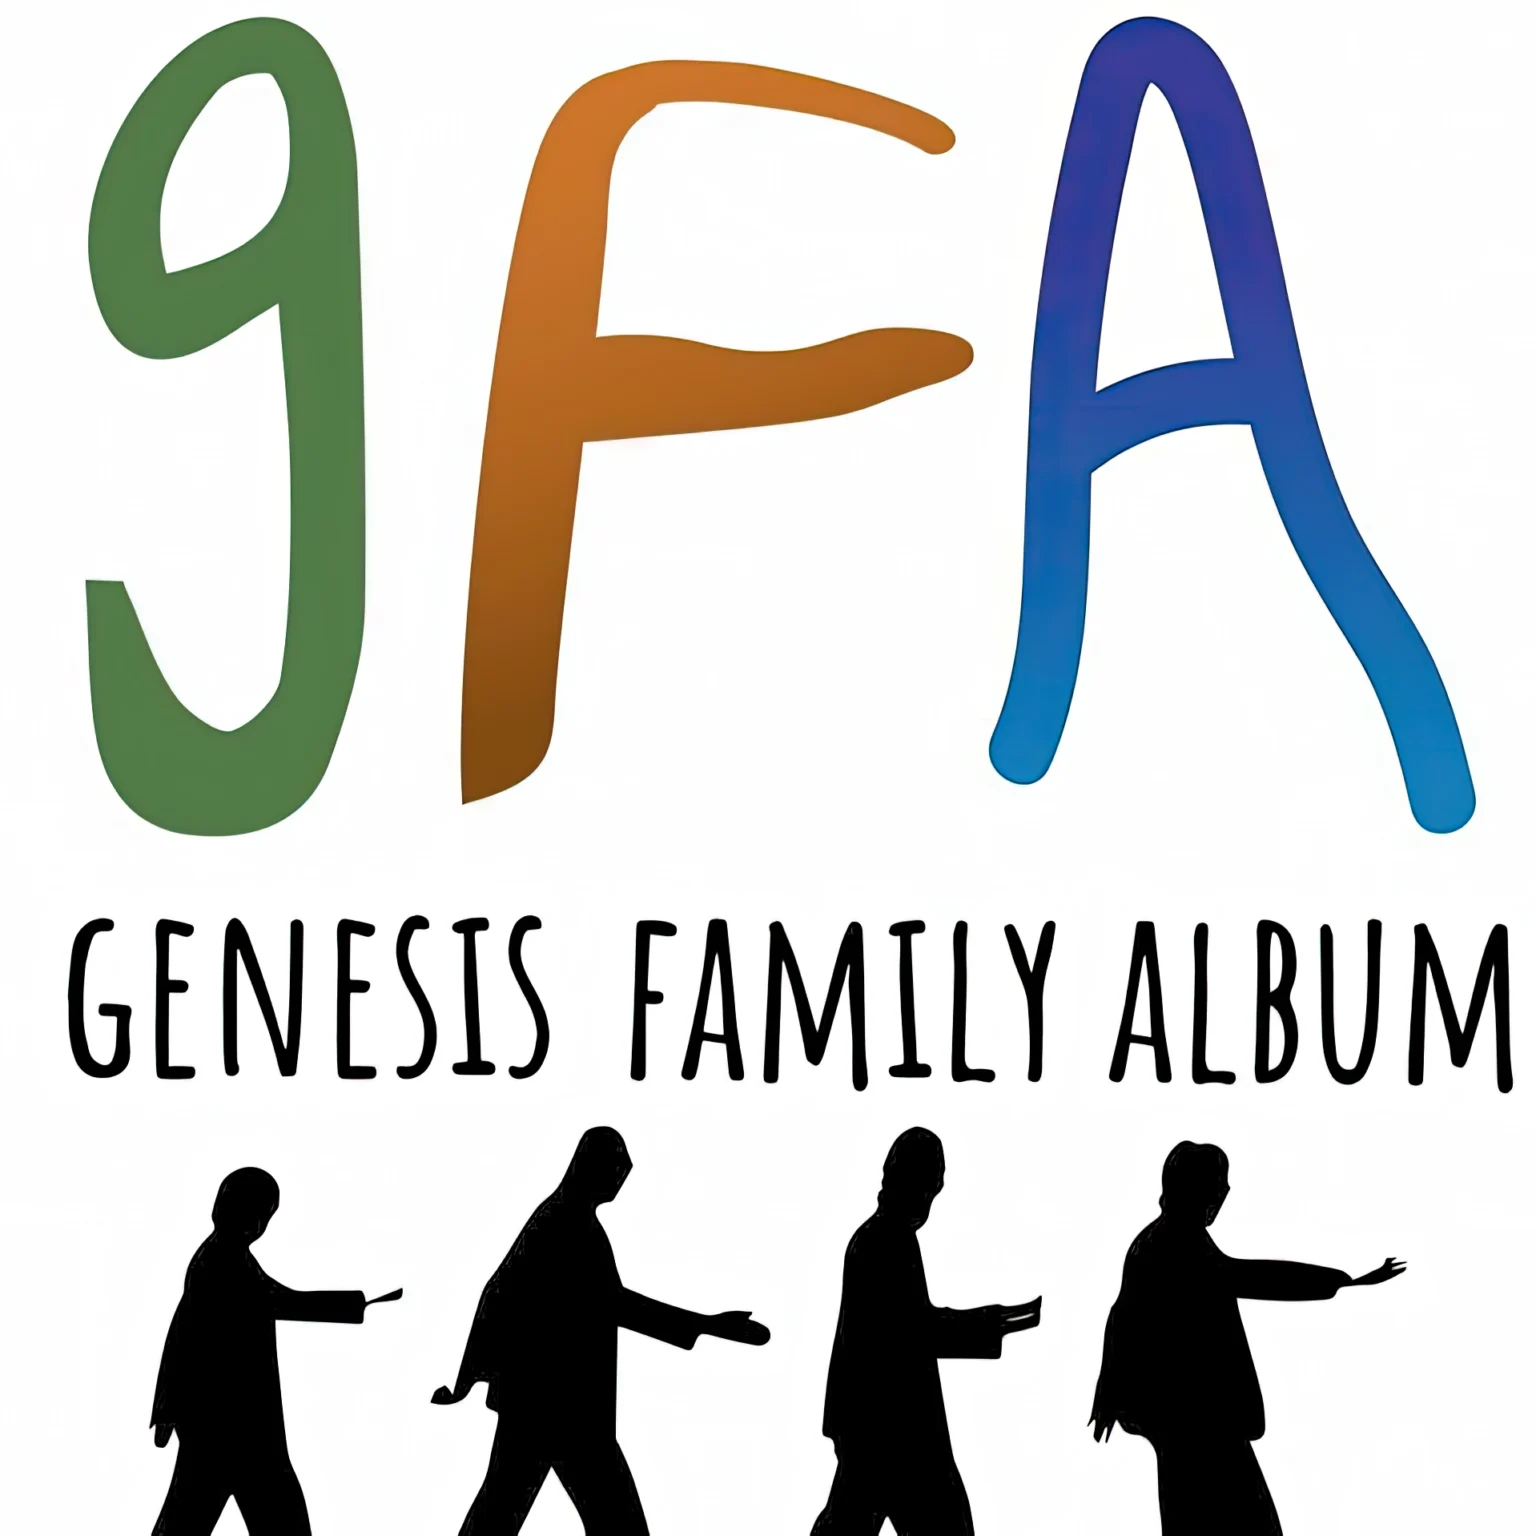 Genesis Family Album | a tribute to Genesis and Phil Collins